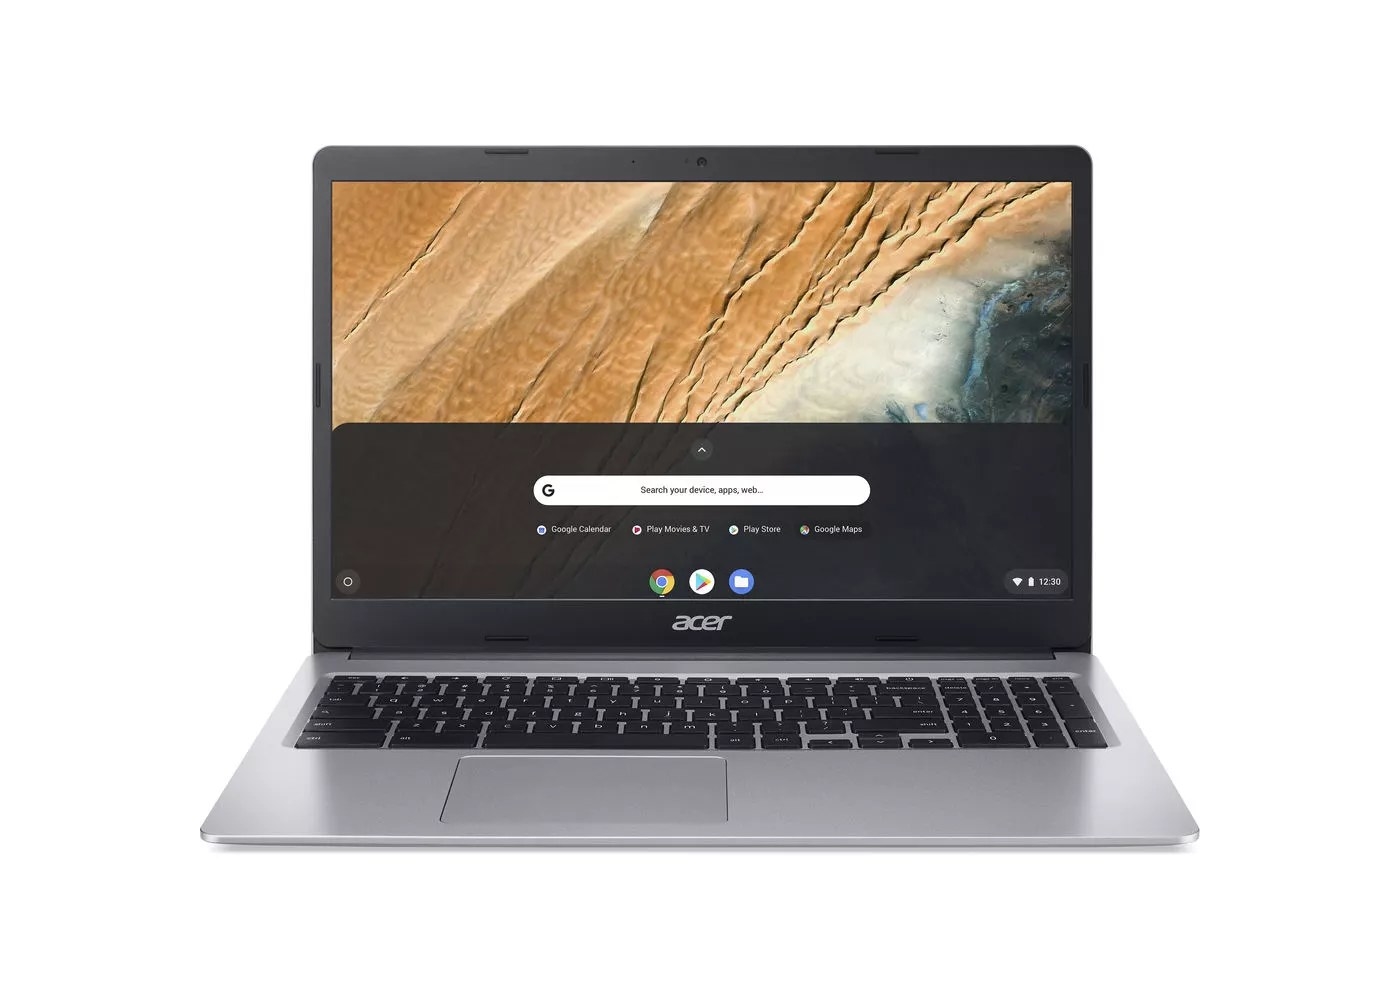 The silver and black laptop